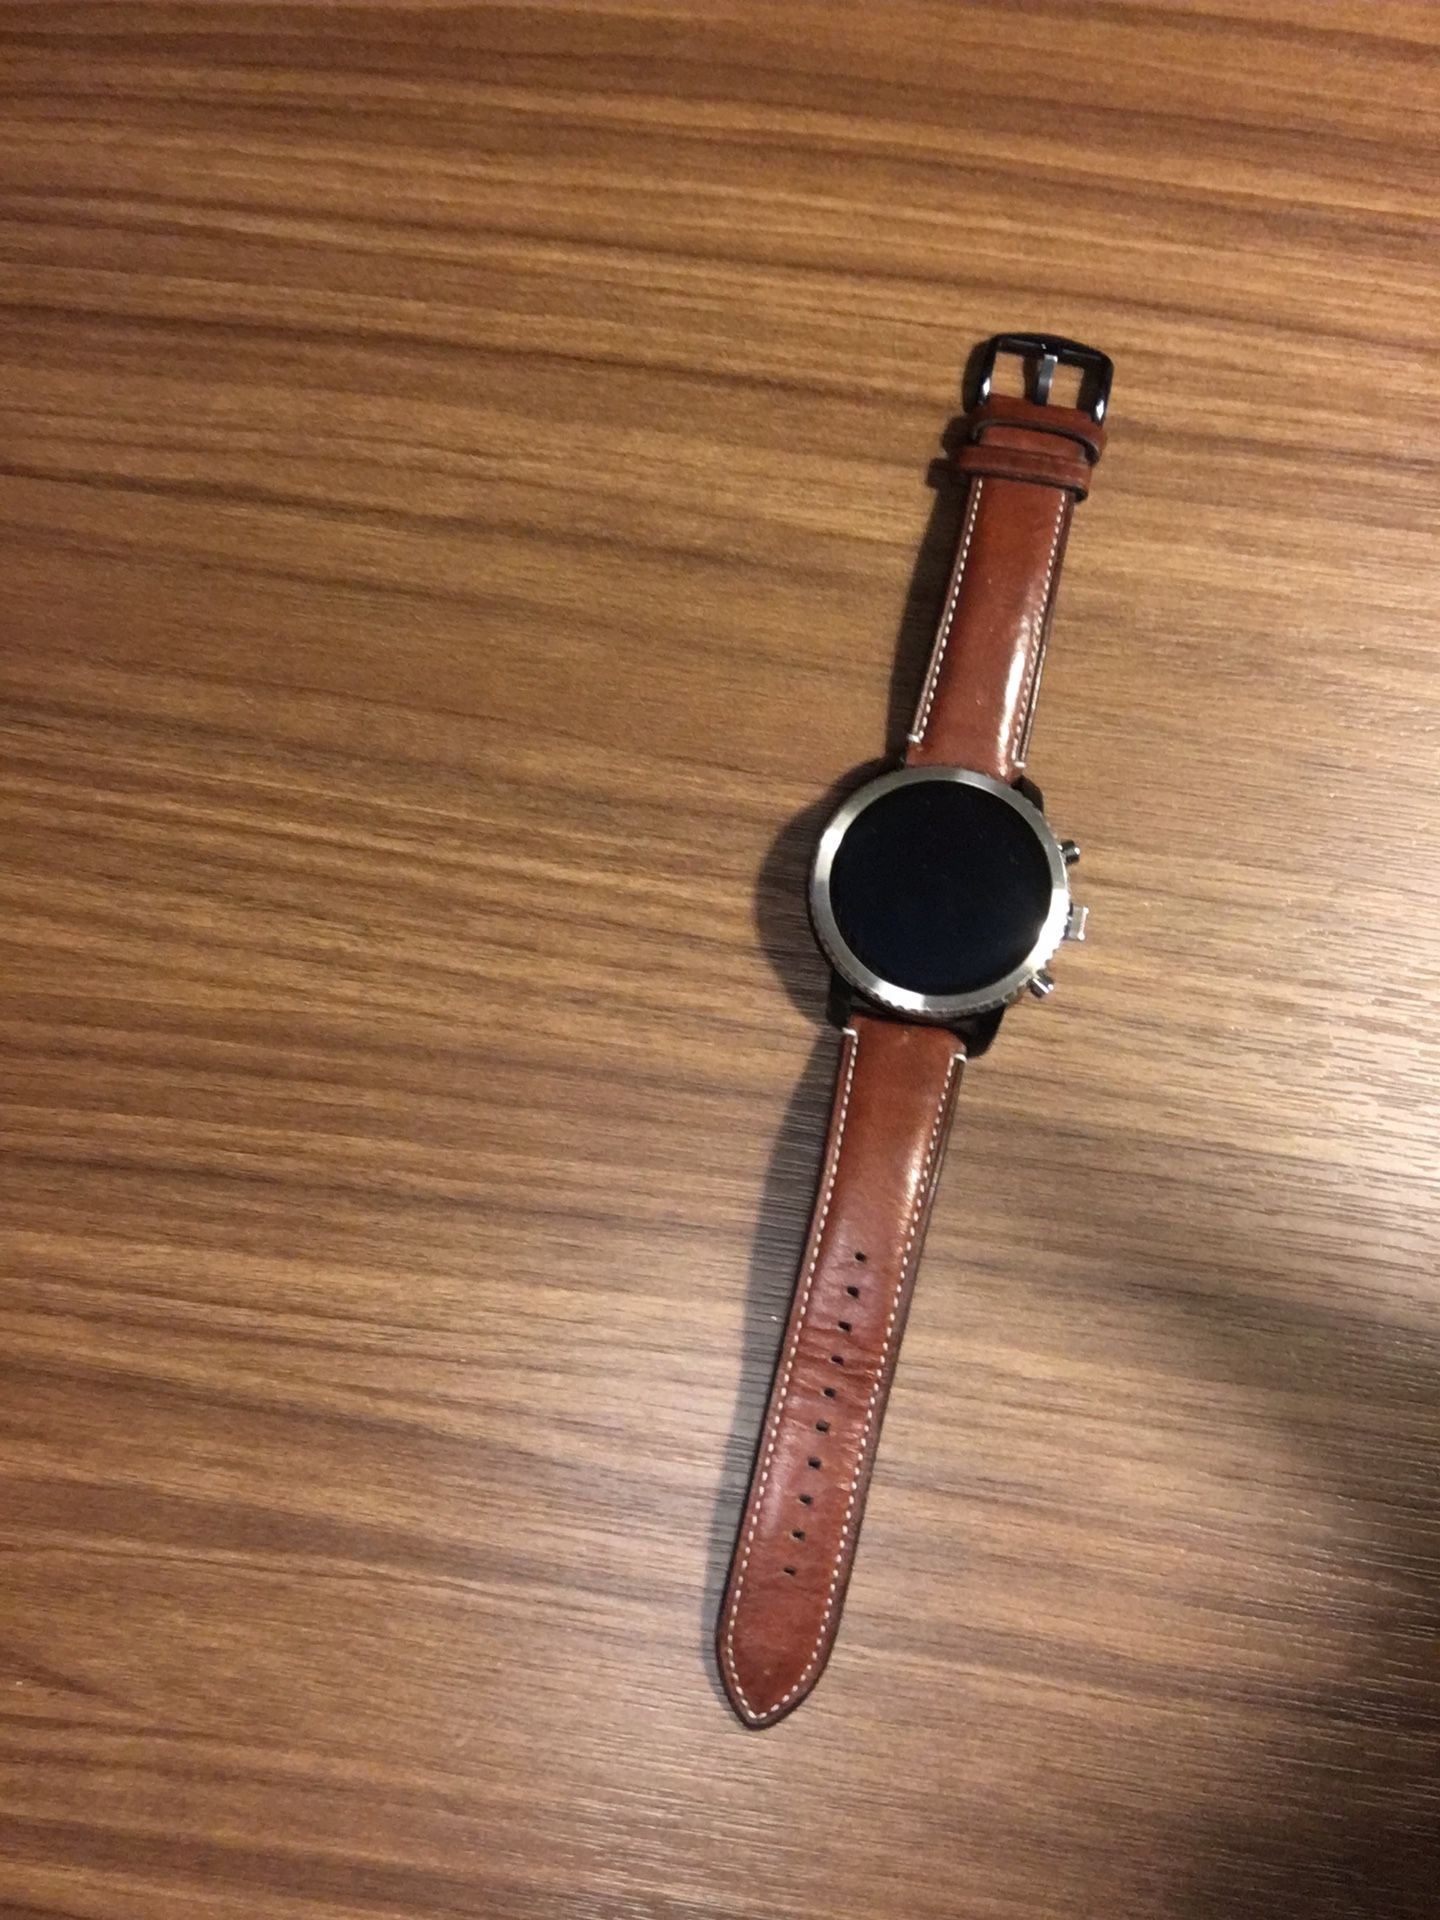 Generation 4 Fossil smartwatch with microphone